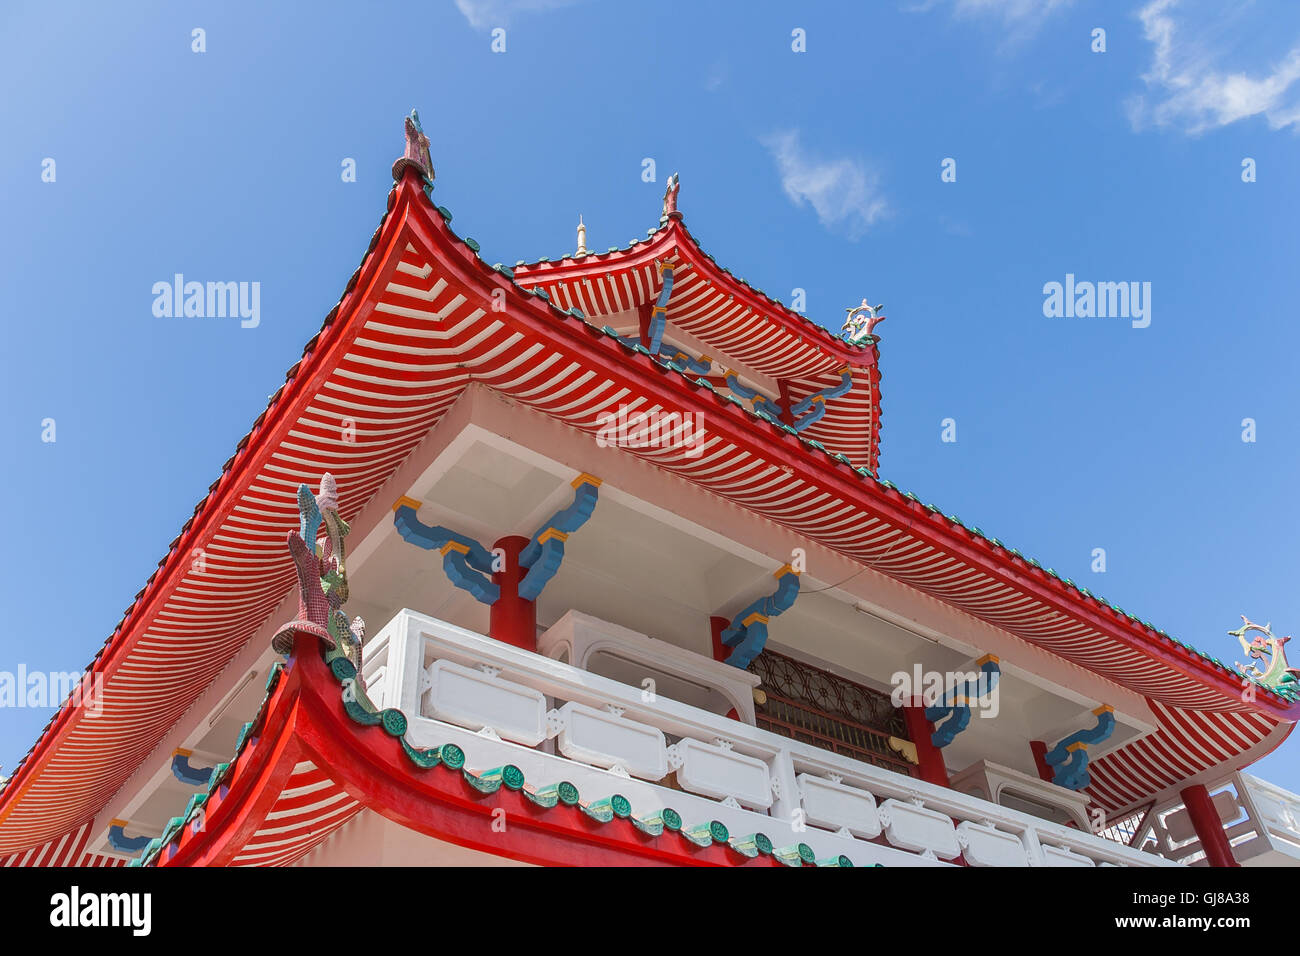 Roof of the Kek Lok Si temple on Pulau Penang in Malaysia. Stock Photo